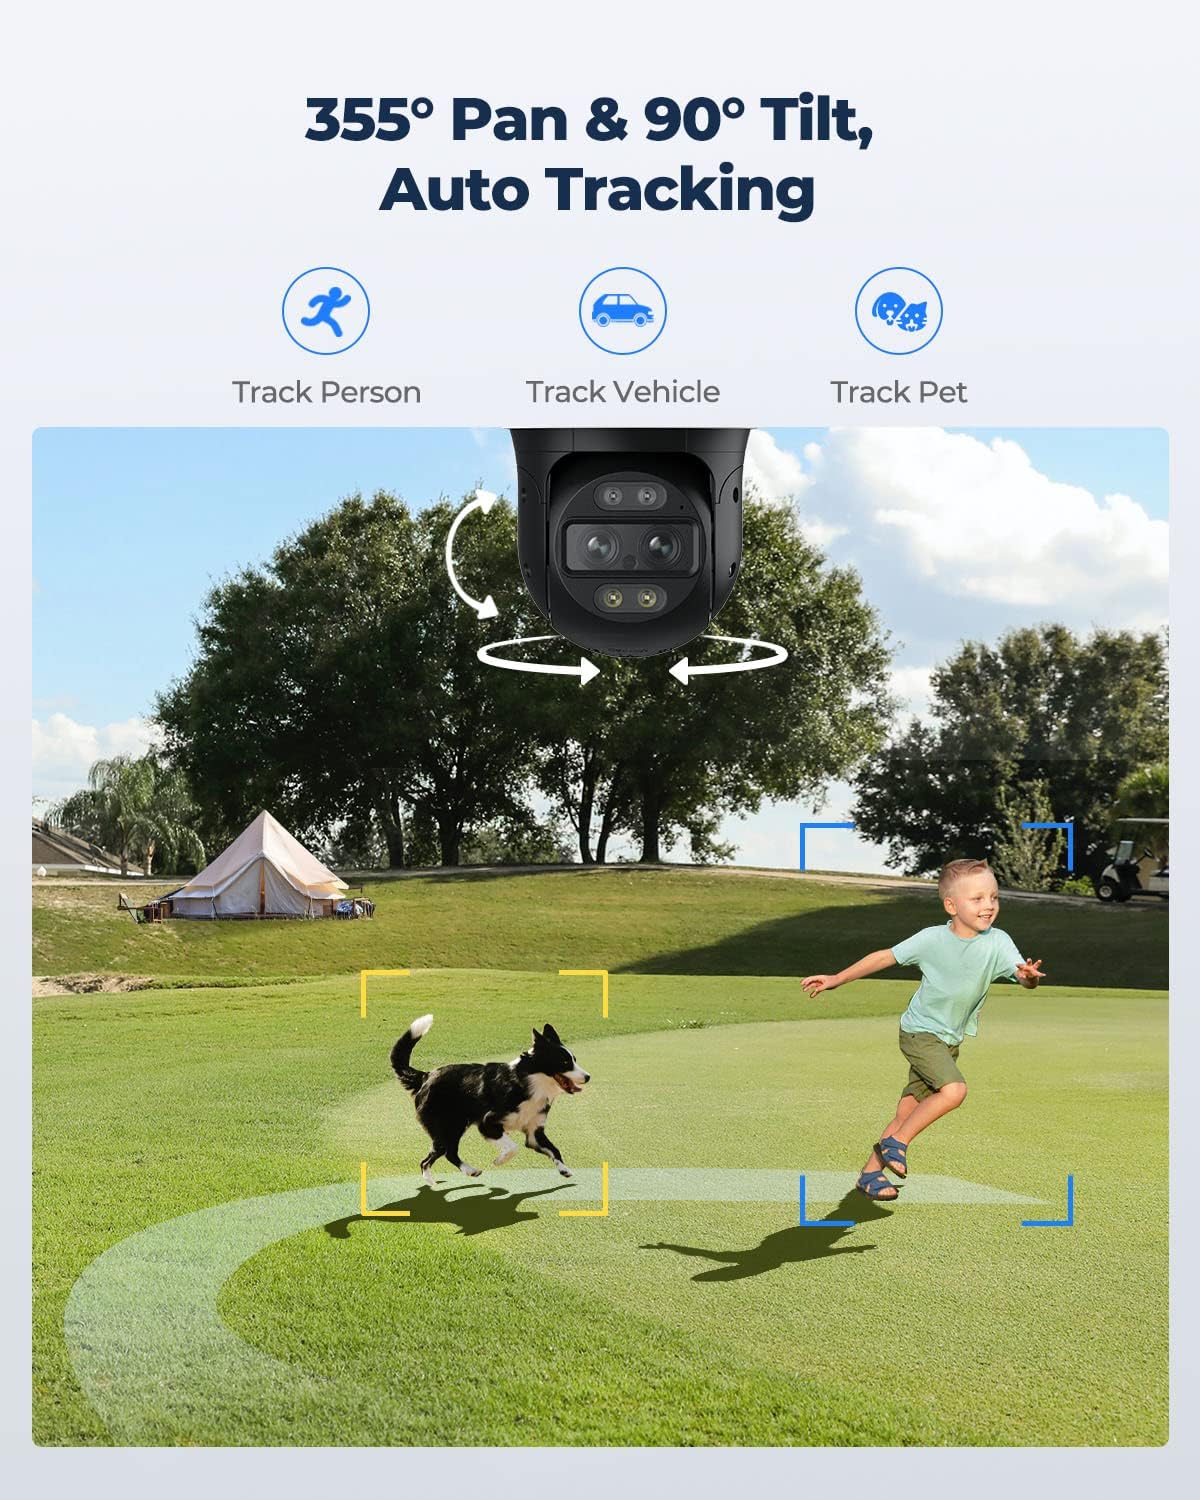 Trackmix Wi-Fi Battery Camera: 4MP - 15fps, Dual Lens 96° + 38°, Night Vision Range up to 15m, Built-in Microphone and Speaker, Motion Detection with Human and Vehicle Detection, Auto-Tracking Feature, Wi-Fi Connectivity, Free Mobile App Included - Spy-shop.com